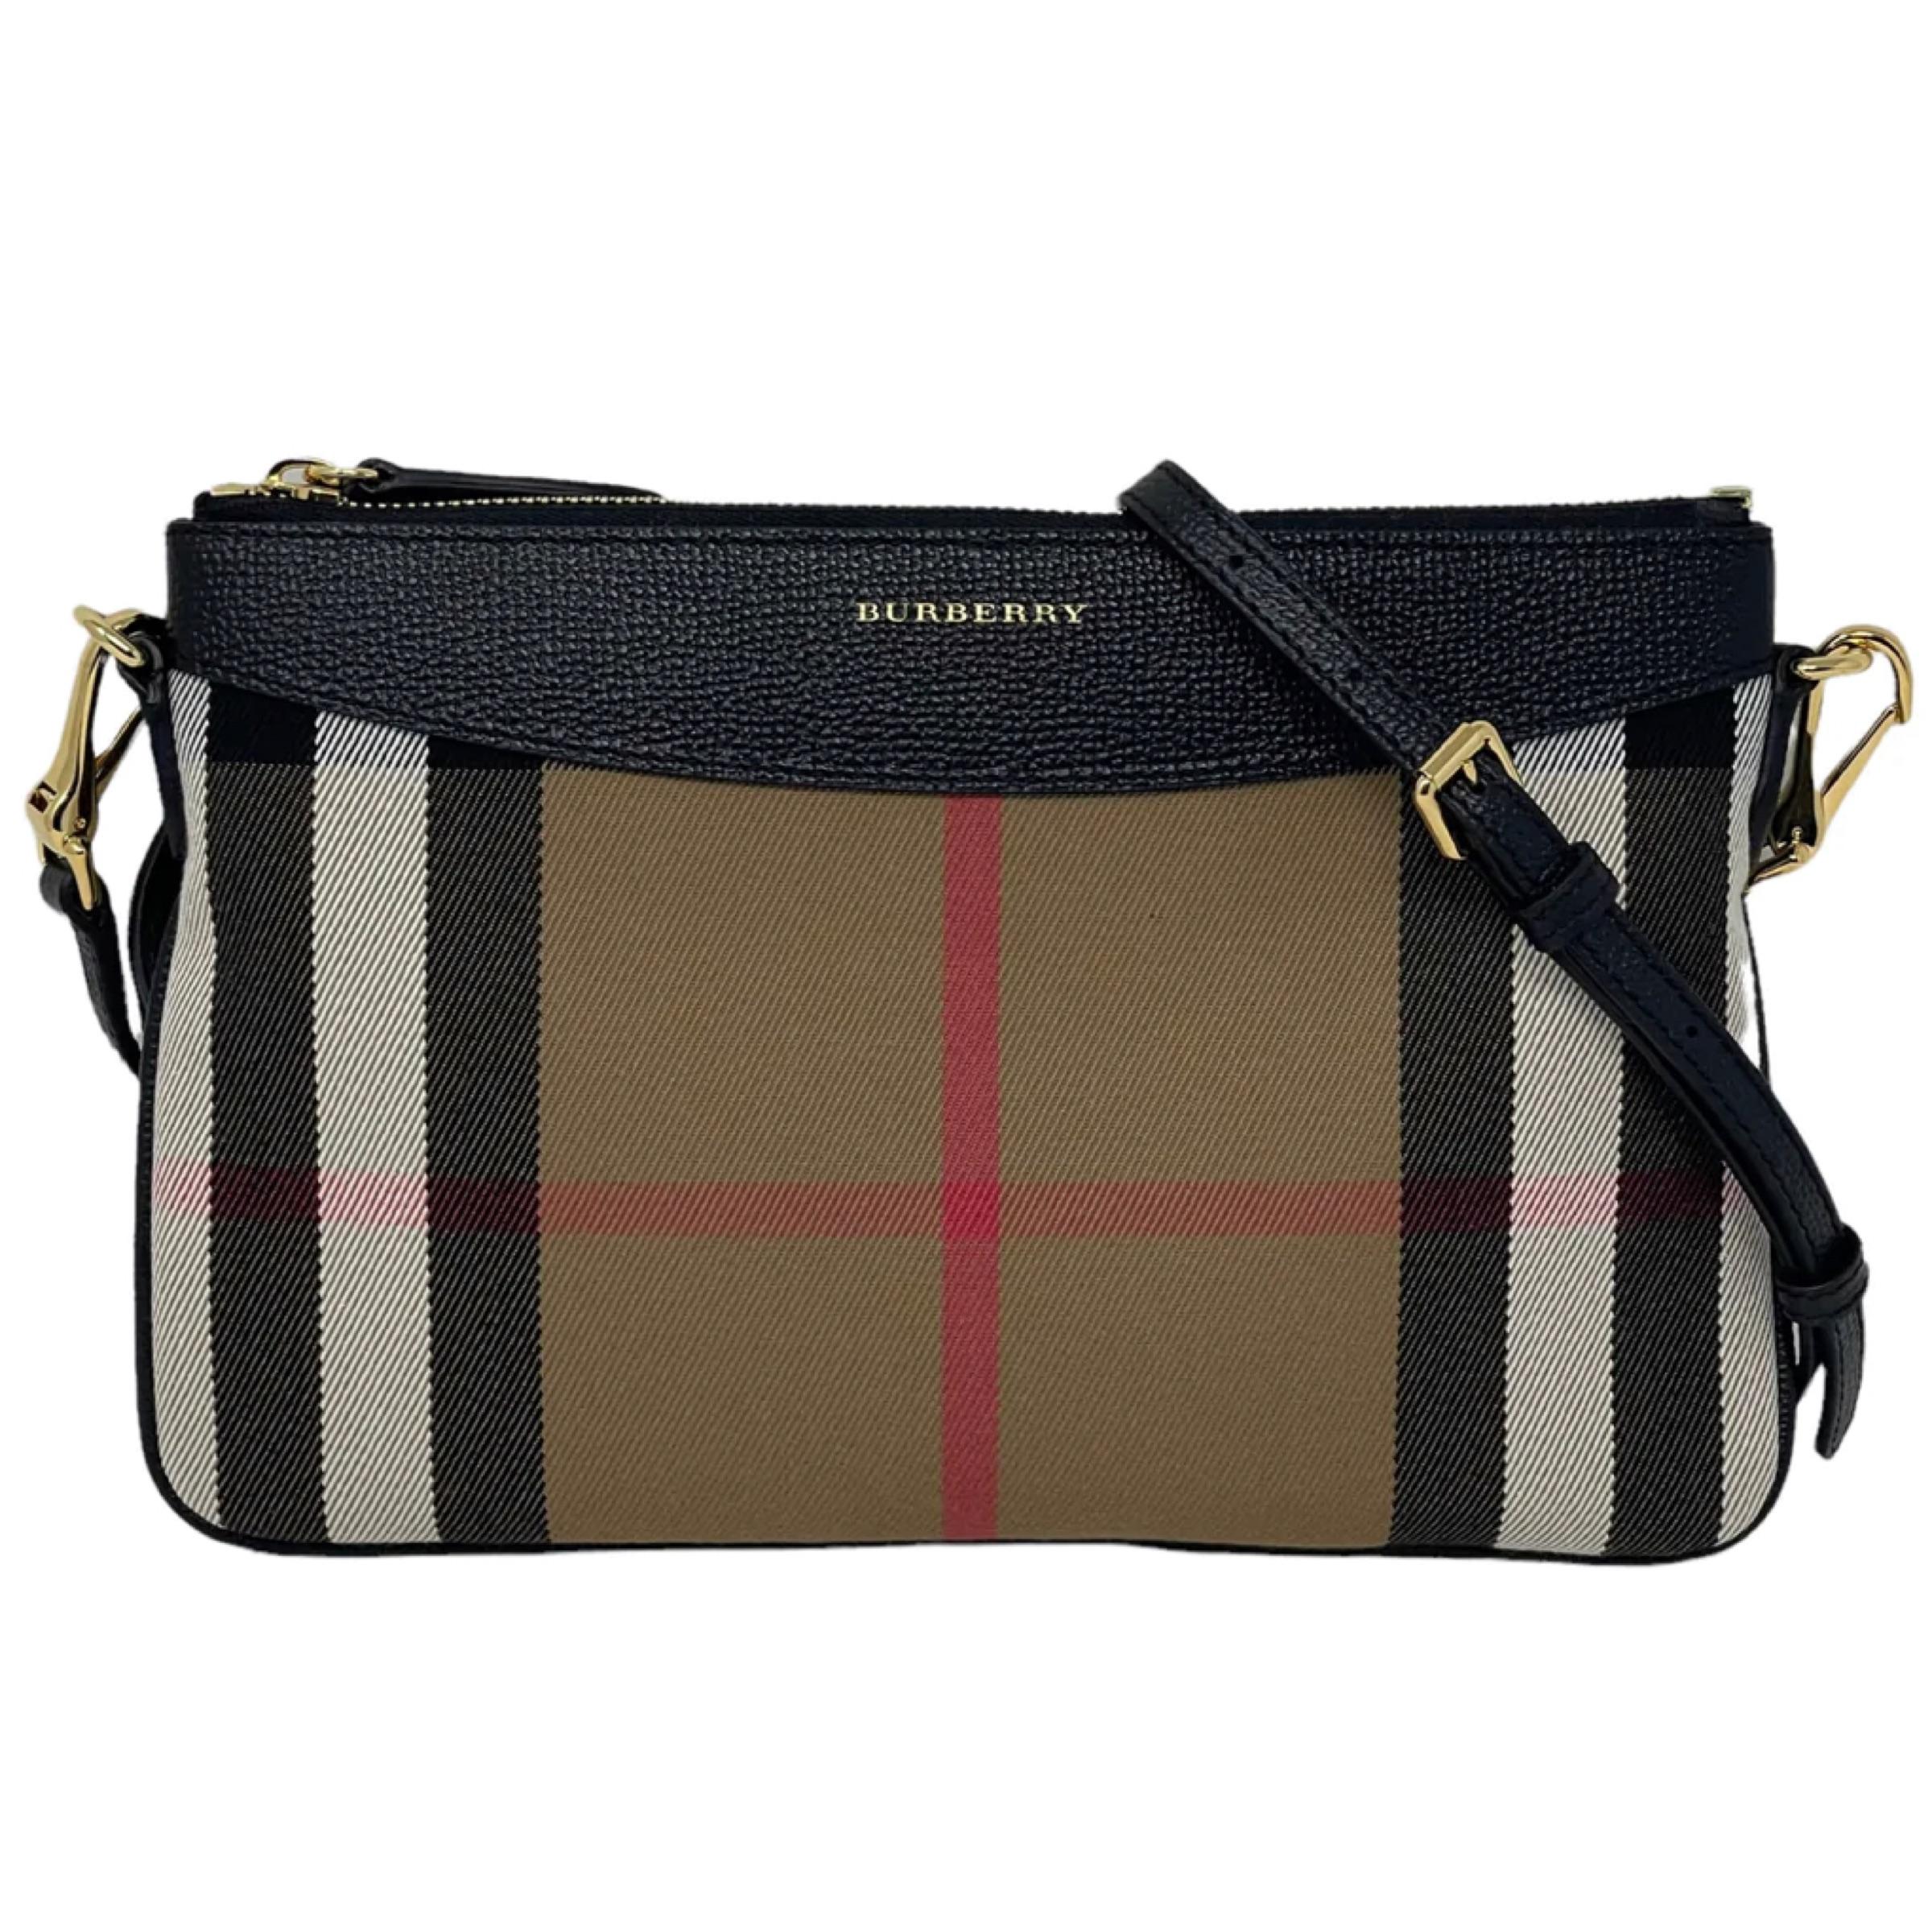 New Burberry Brown/Black Derby Peyton House Check Coated Canvas Clutch Crossbody Bag

Authenticity Guaranteed

DETAILS
Brand: Burberry
Condition: Brand new
Gender: Women
Category: Crossbody bag
Color: Brown/black
Material: Coated canvas
House check